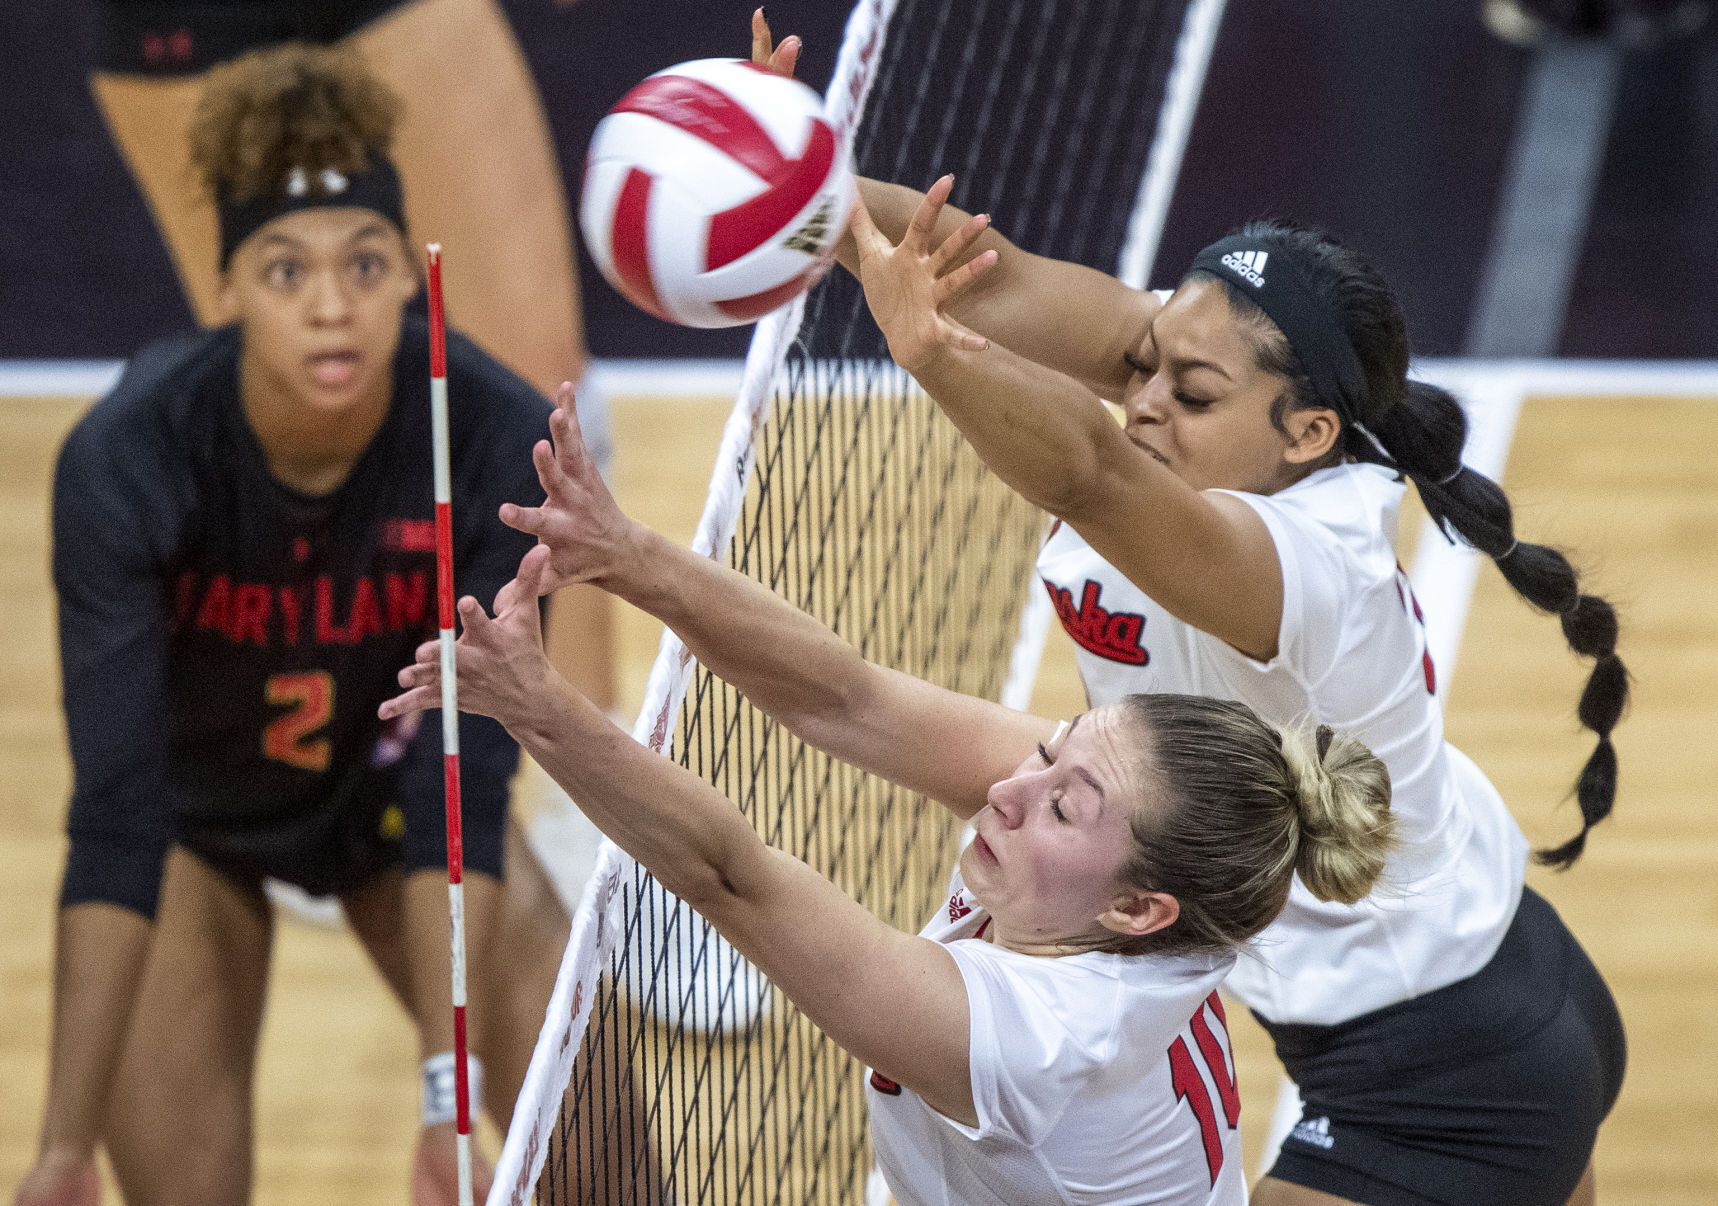 Husker volleyball notes The middle blocker position could look different next year; Kubik sisters so excited to team up